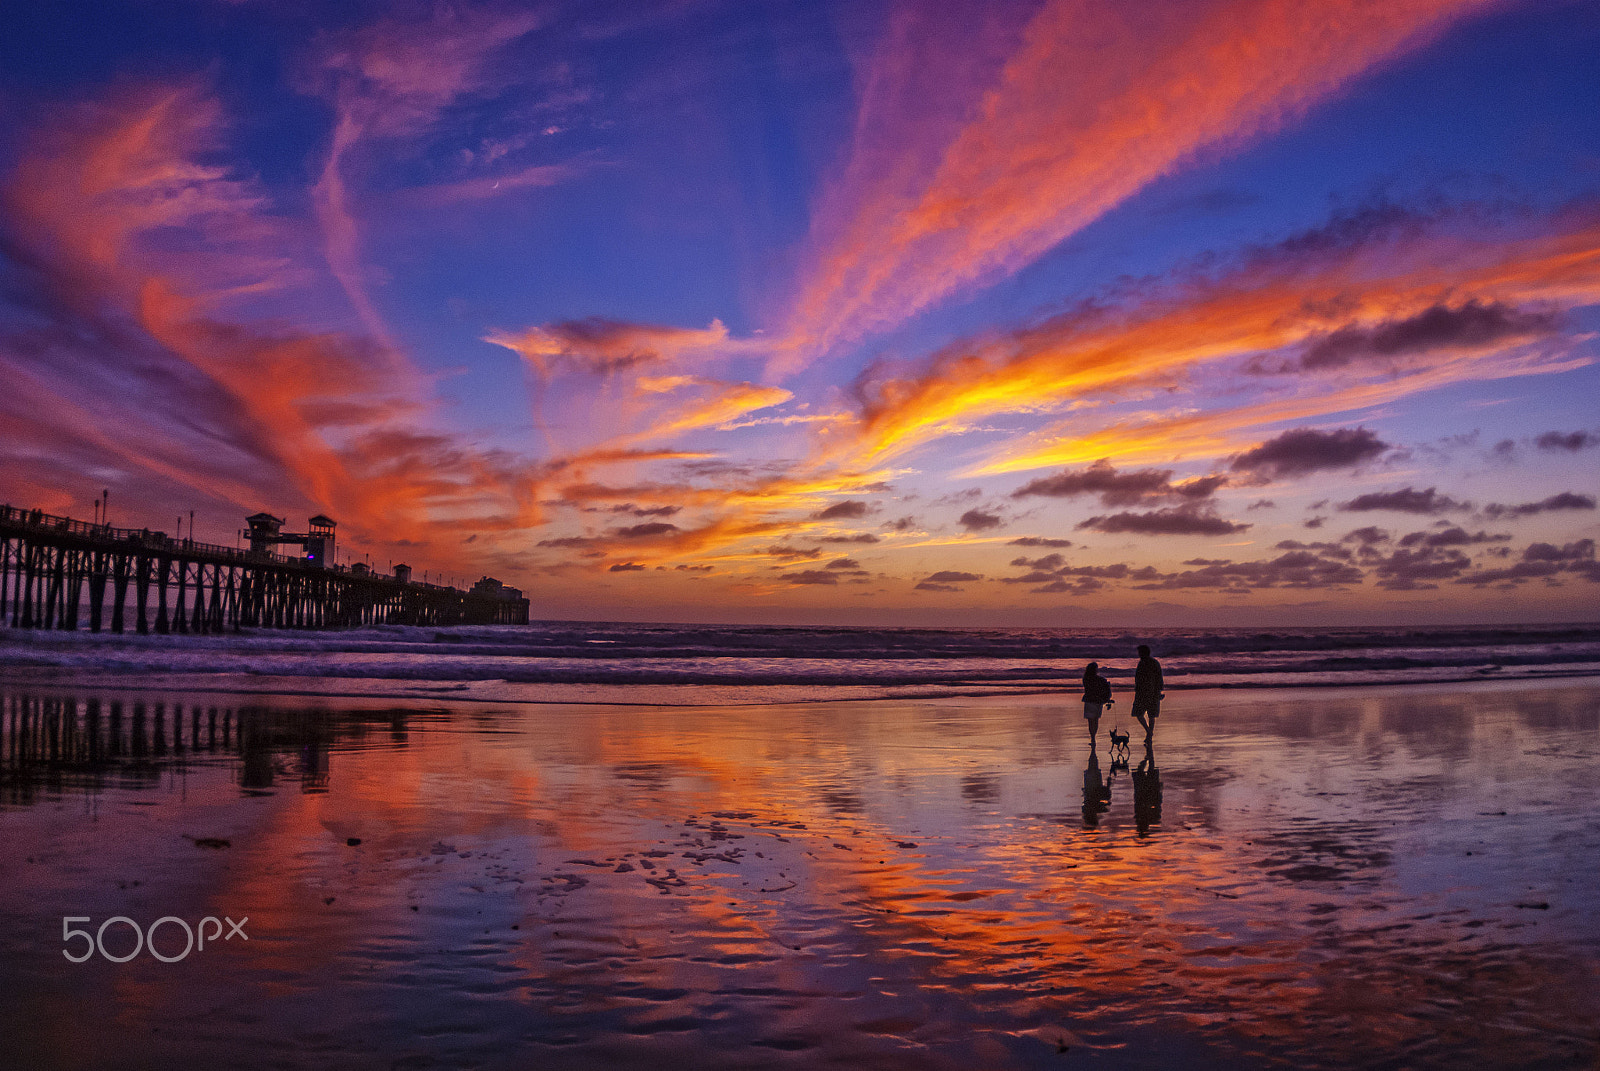 Nikon D80 sample photo. Fiery sunset in oceanside - october 26, 2014 photography